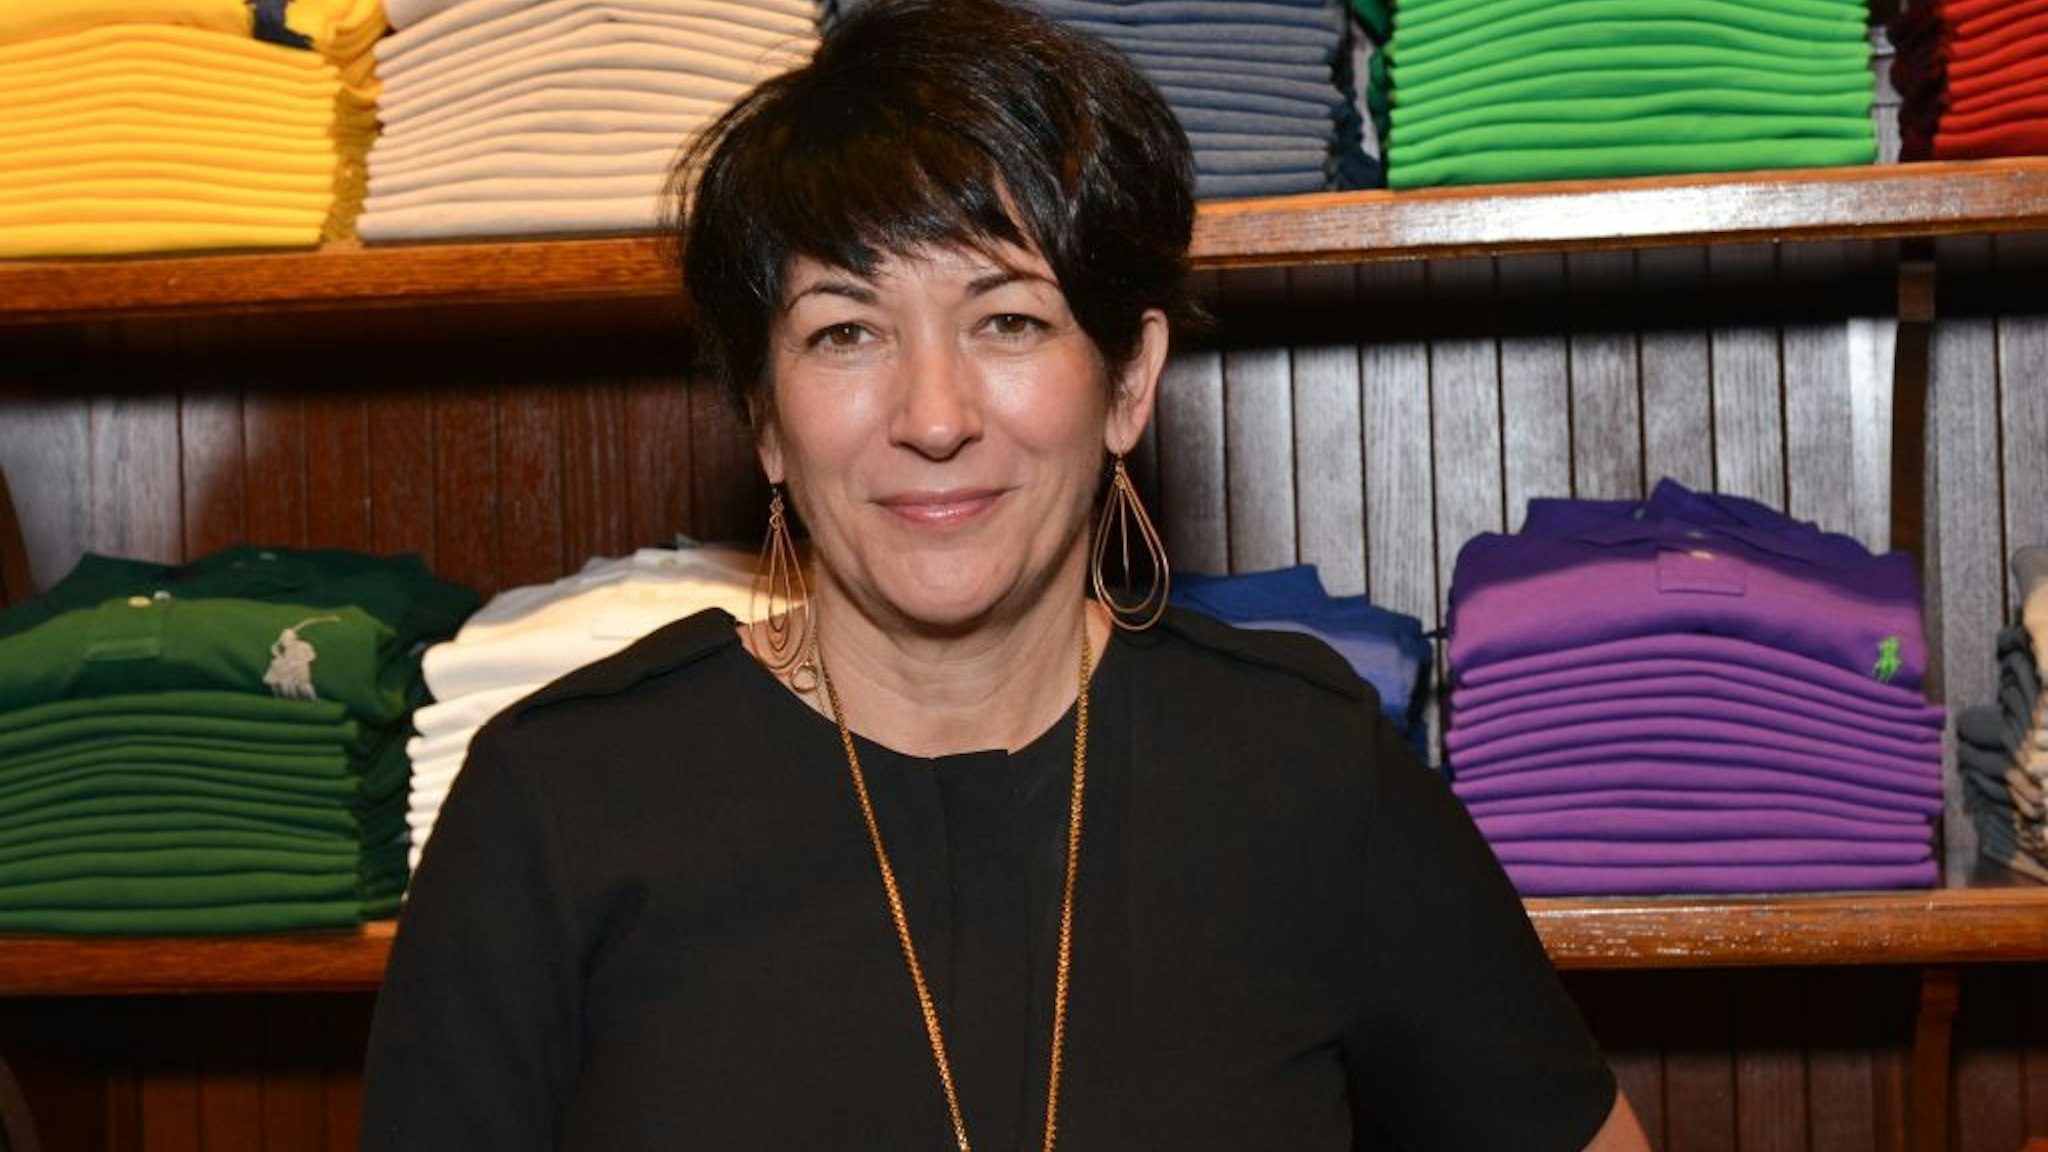 NEW YORK, NY - NOVEMBER 3: Ghislaine Maxwell attends Polo Ralph Lauren host Victories of Athlete Ally at Polo Ralph Lauren Store on November 3, 2015 in New York City.